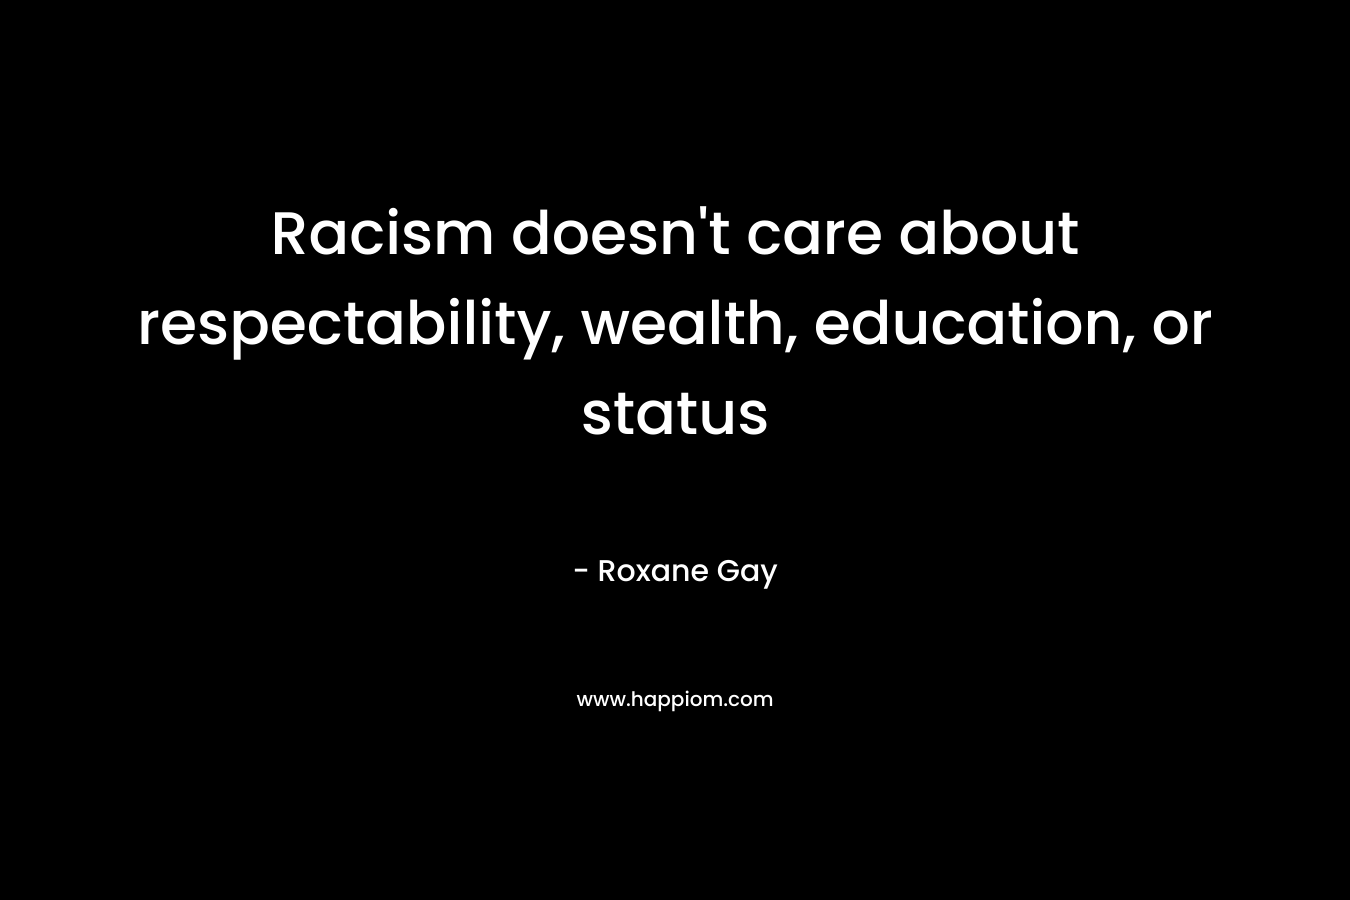 Racism doesn’t care about respectability, wealth, education, or status – Roxane Gay